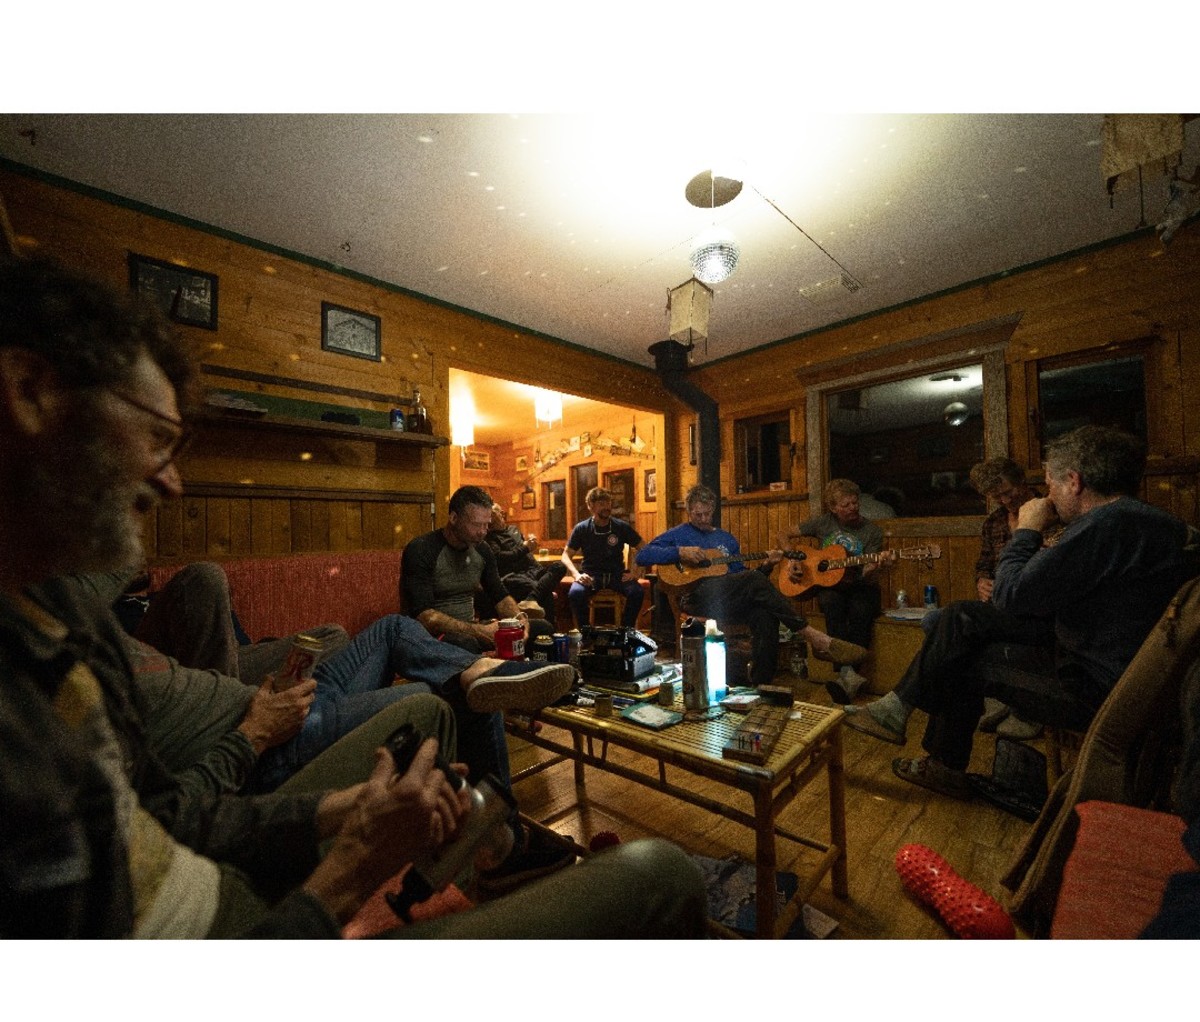 Guests at the Mount Carlyle Backcountry Lodge kick back with drinks and guitars in the living room after a ski day.